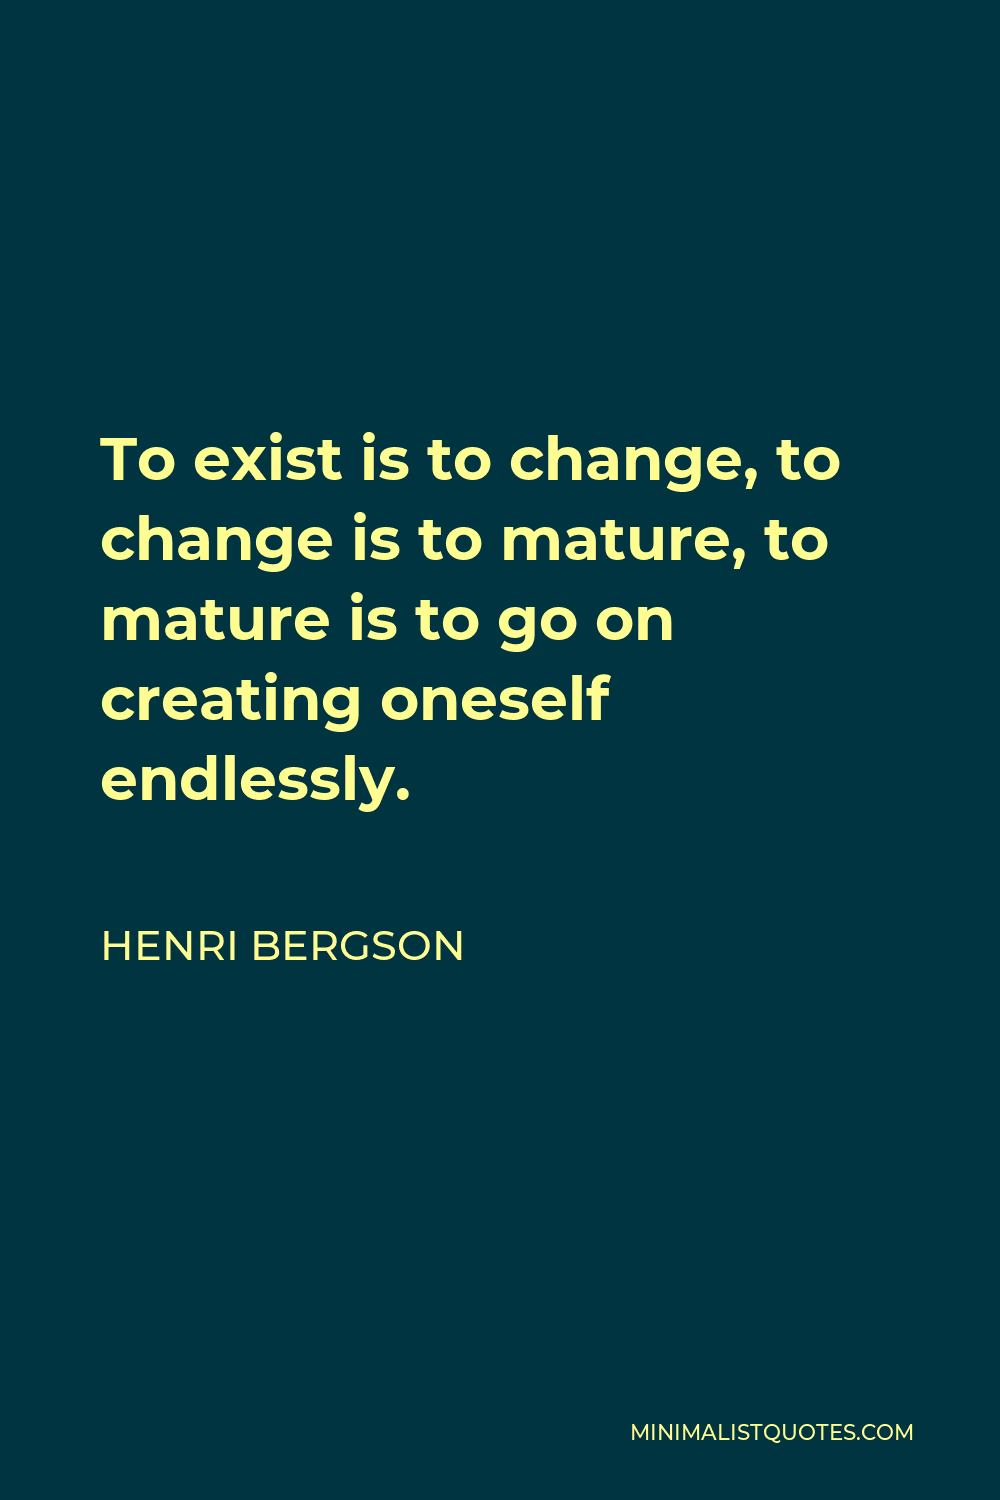 Henri Bergson Quote - To exist is to change, to change is to mature, to mature is to go on creating oneself endlessly.